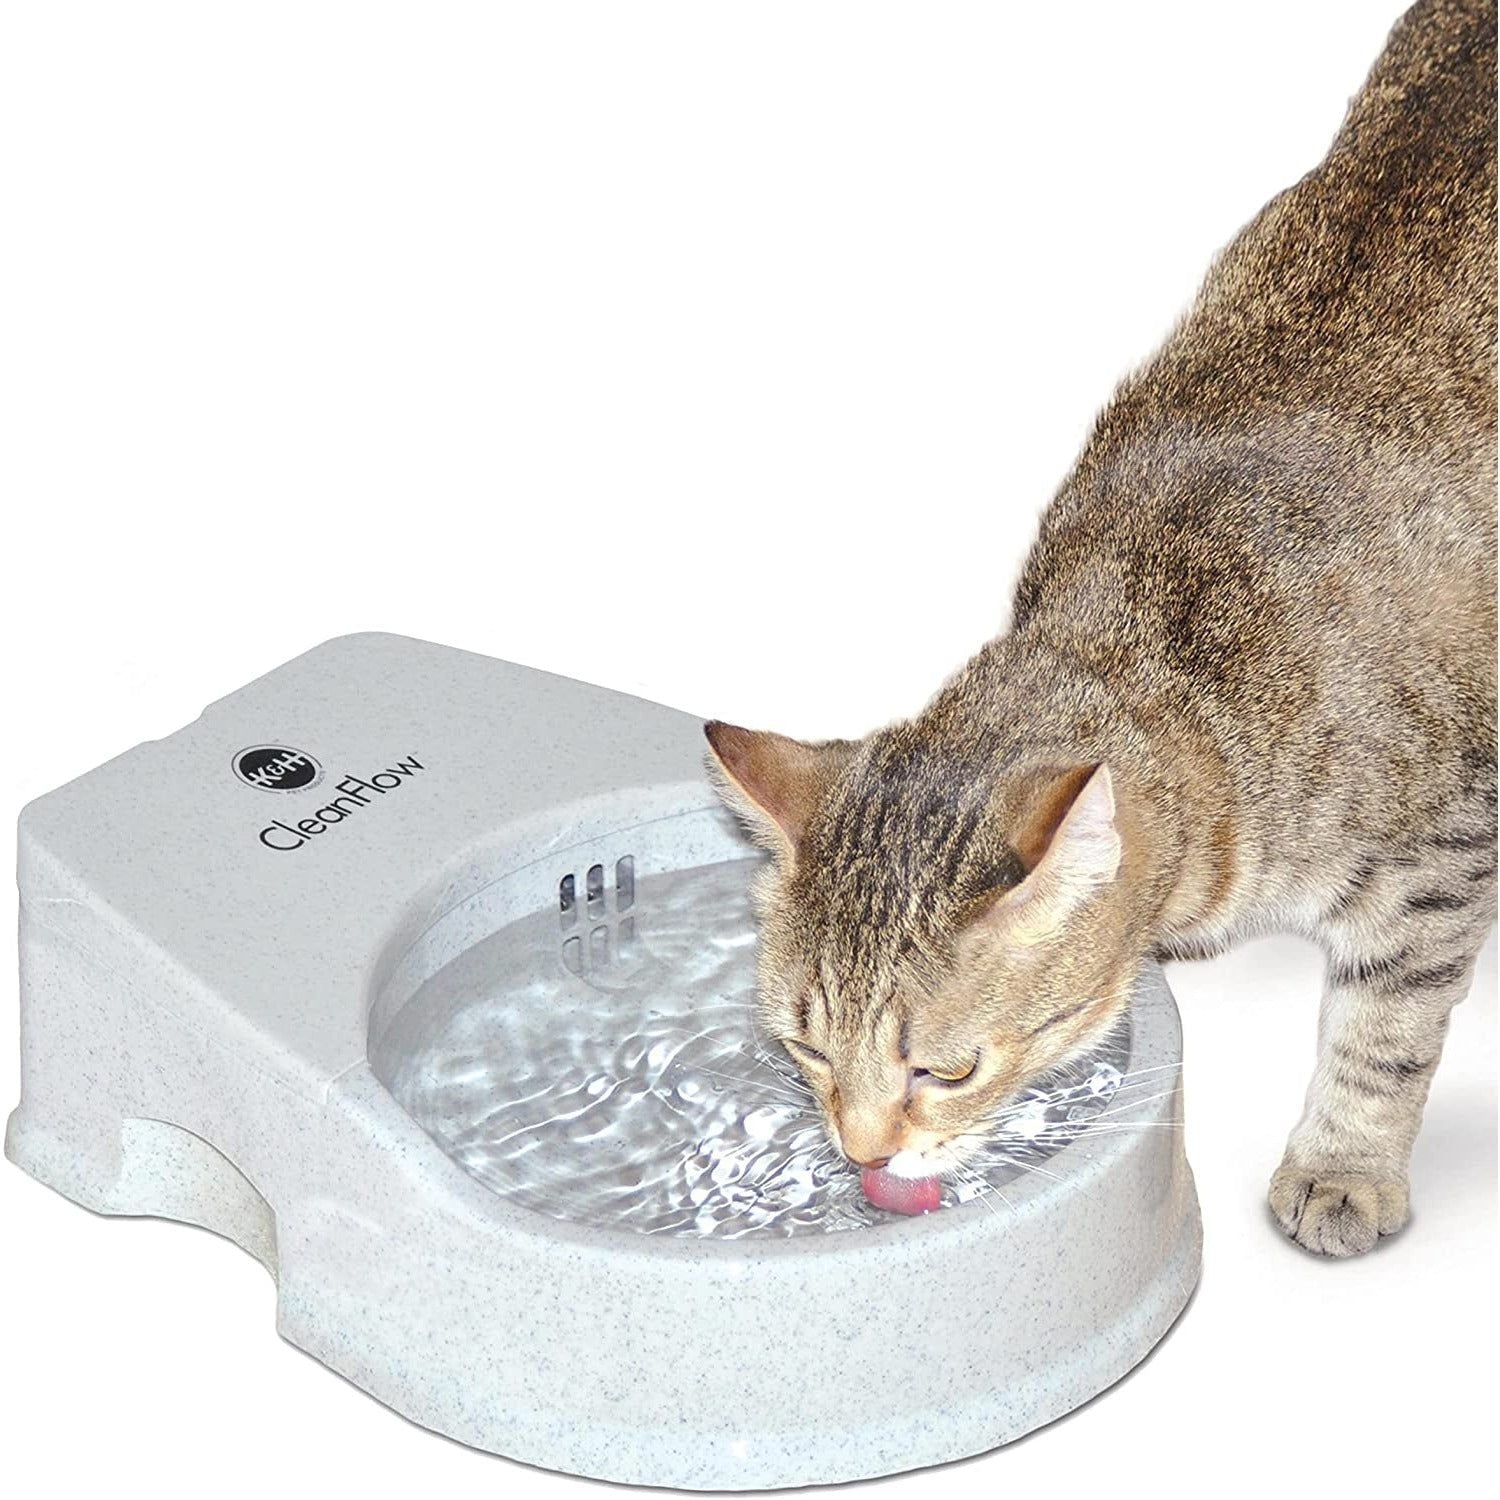 Cleanflow Cat Filtered Water Bowl